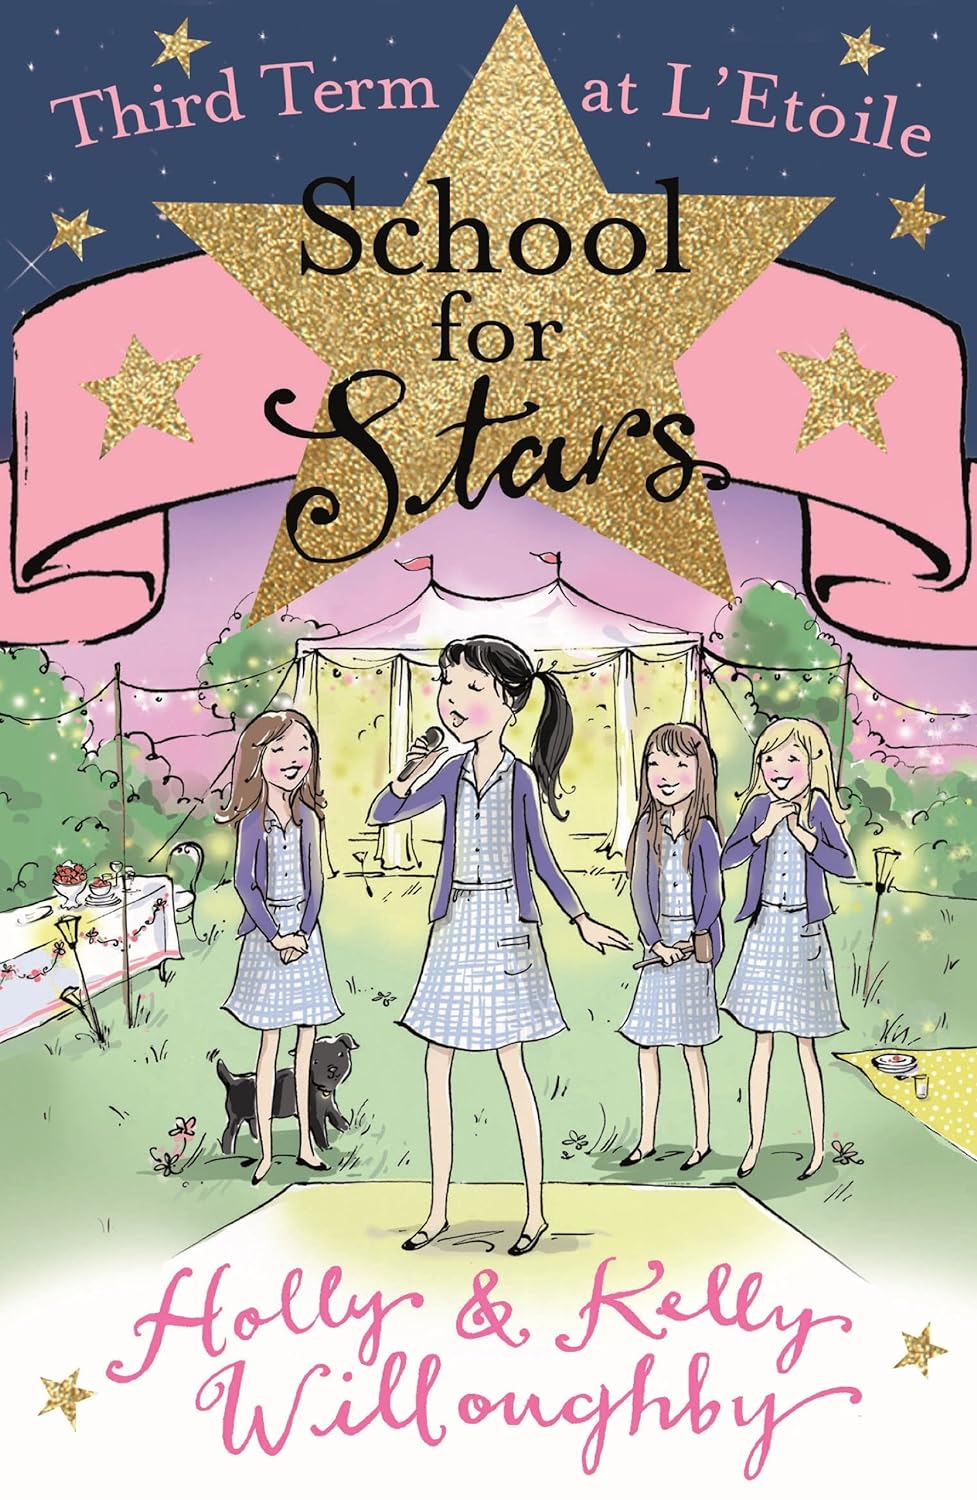 Third Term at L'Etoile: Book 3 (School for Stars)